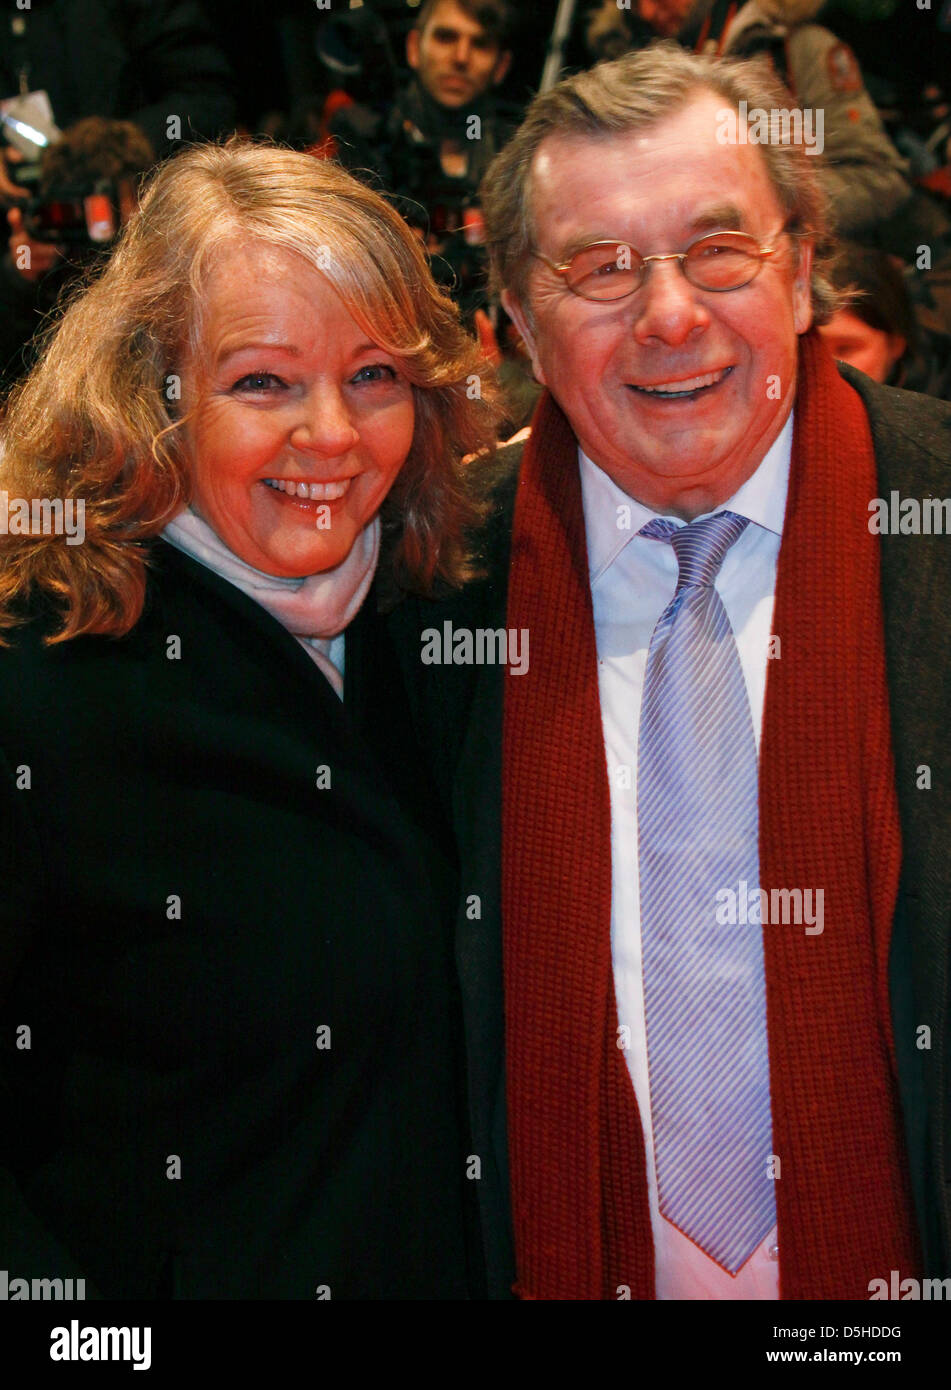 Literary critic Hellmuth Karasek (R) and his wife Armgard Seegers-Karasek (L) arrive at the opening of the 60th Berlinale international film festival at Berlinale Palast in Berlin, Germany, 11 February 2010. Photo: Hubert Boesl Stock Photo